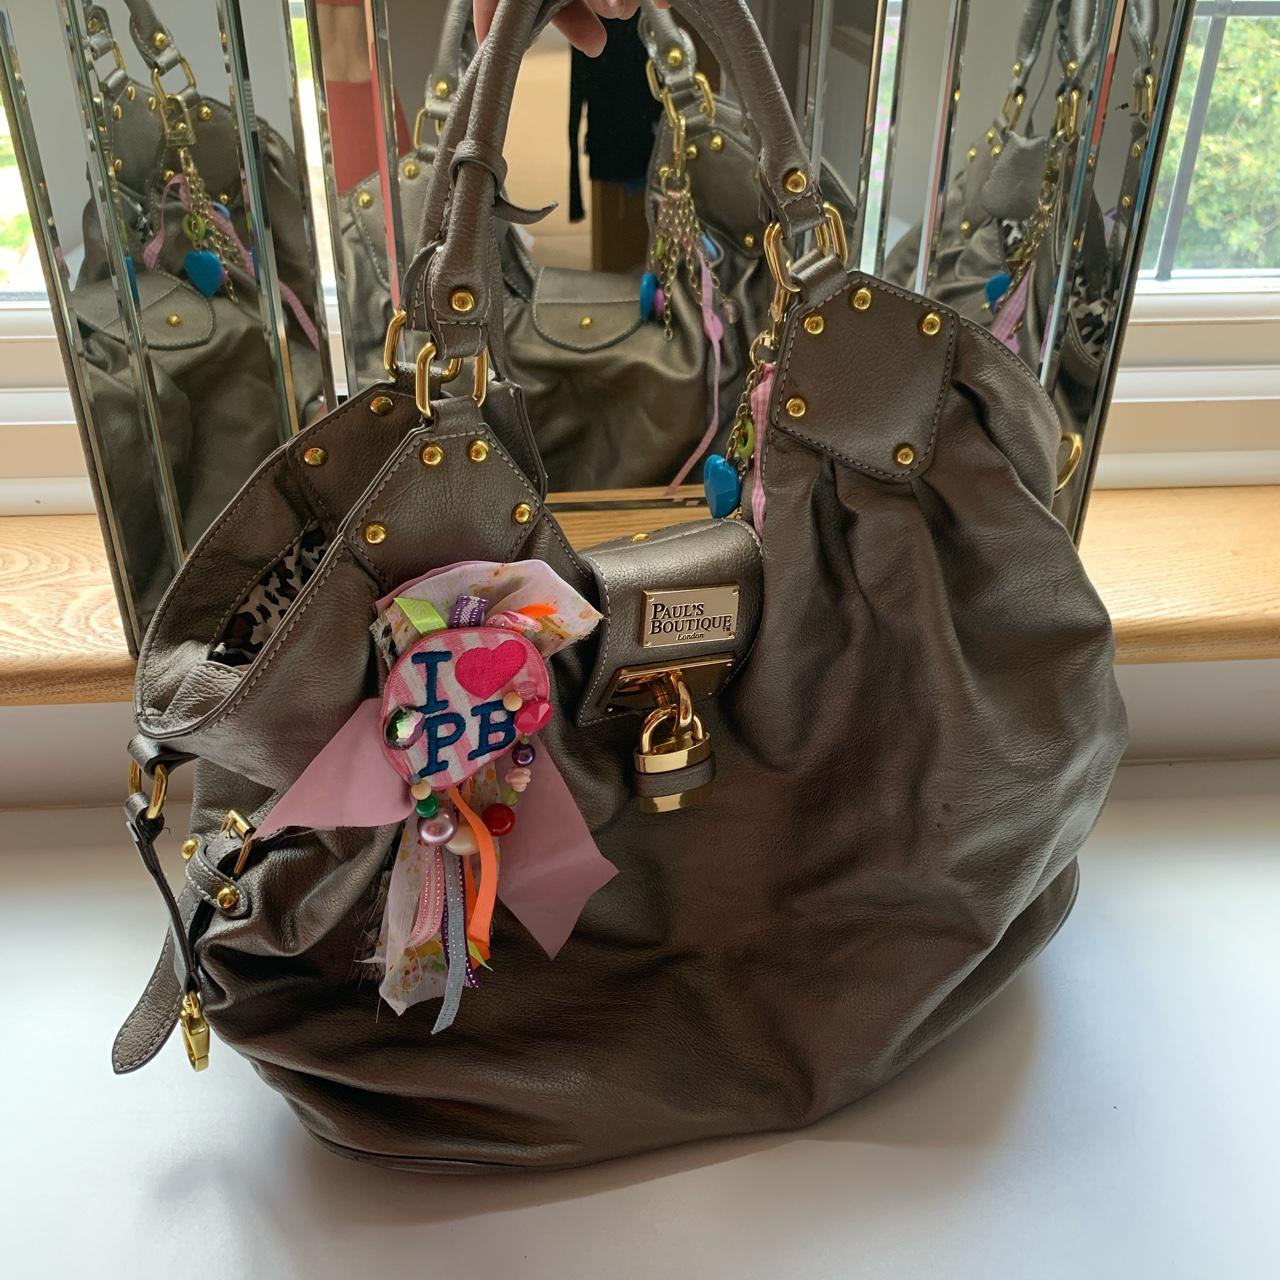 PAUL'S BOUTIQUE “GRACIE” BAG (from TOPSHOP)